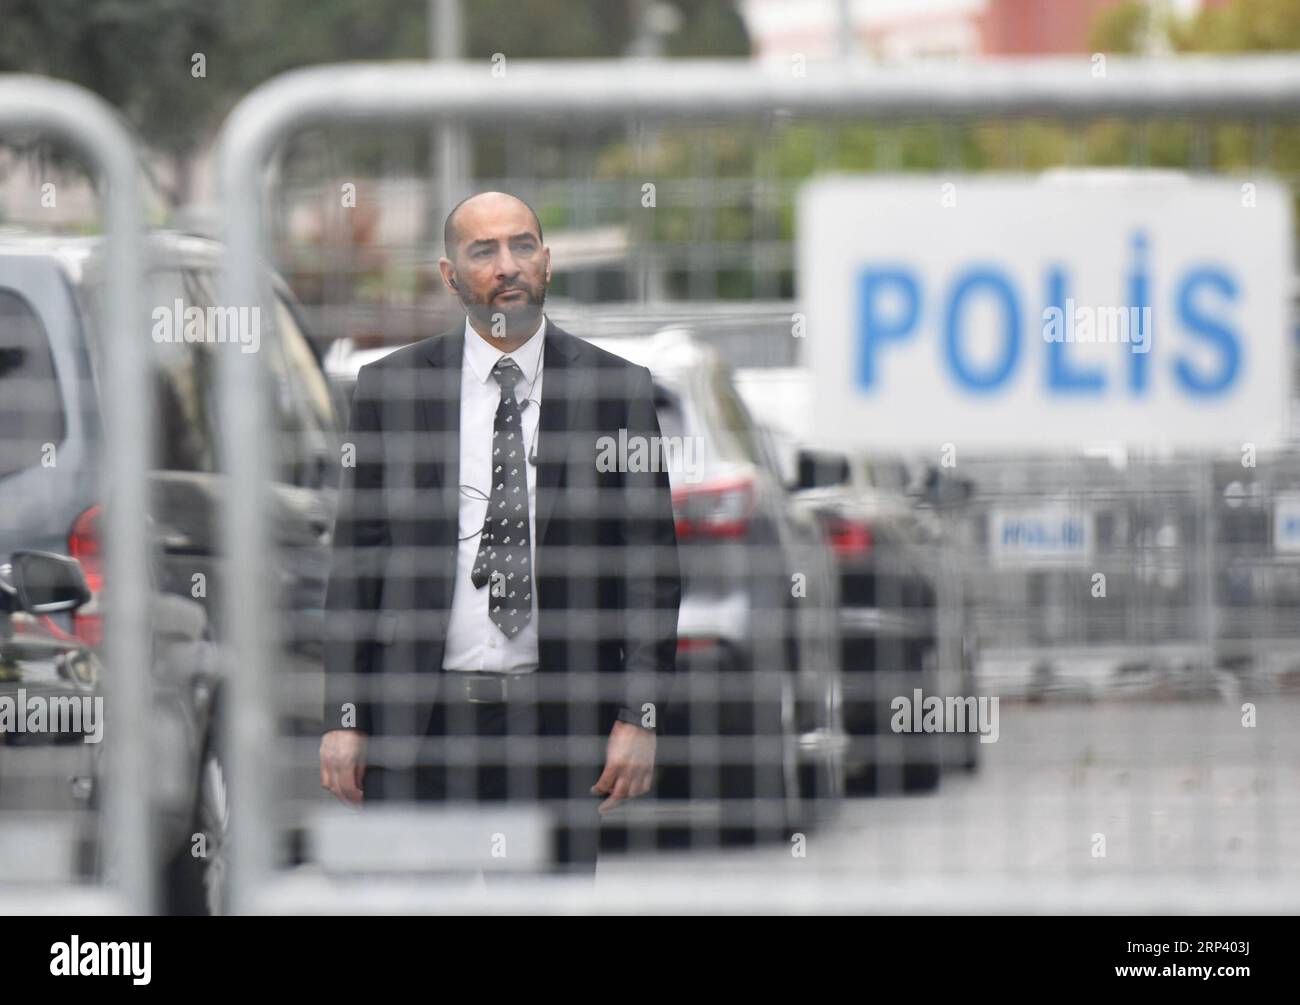 (181020) -- ISTANBUL, Oct. 20, 2018 -- A security staff stands guard outside the Saudi consulate in Istanbul, Turkey, on Oct. 20, 2018. Preliminary investigations by the Saudi Public Prosecution showed missing journalist Jamal Khashoggi died after a fight at the Saudi consulate in the Turkish city of Istanbul, Saudi Press Agency (SPA) reported on Saturday. ) (wtc) TURKEY-ISTANBUL-SAUDI CONSULATE-JAMAL KHASHOGGI-DEATH HexCanling PUBLICATIONxNOTxINxCHN Stock Photo